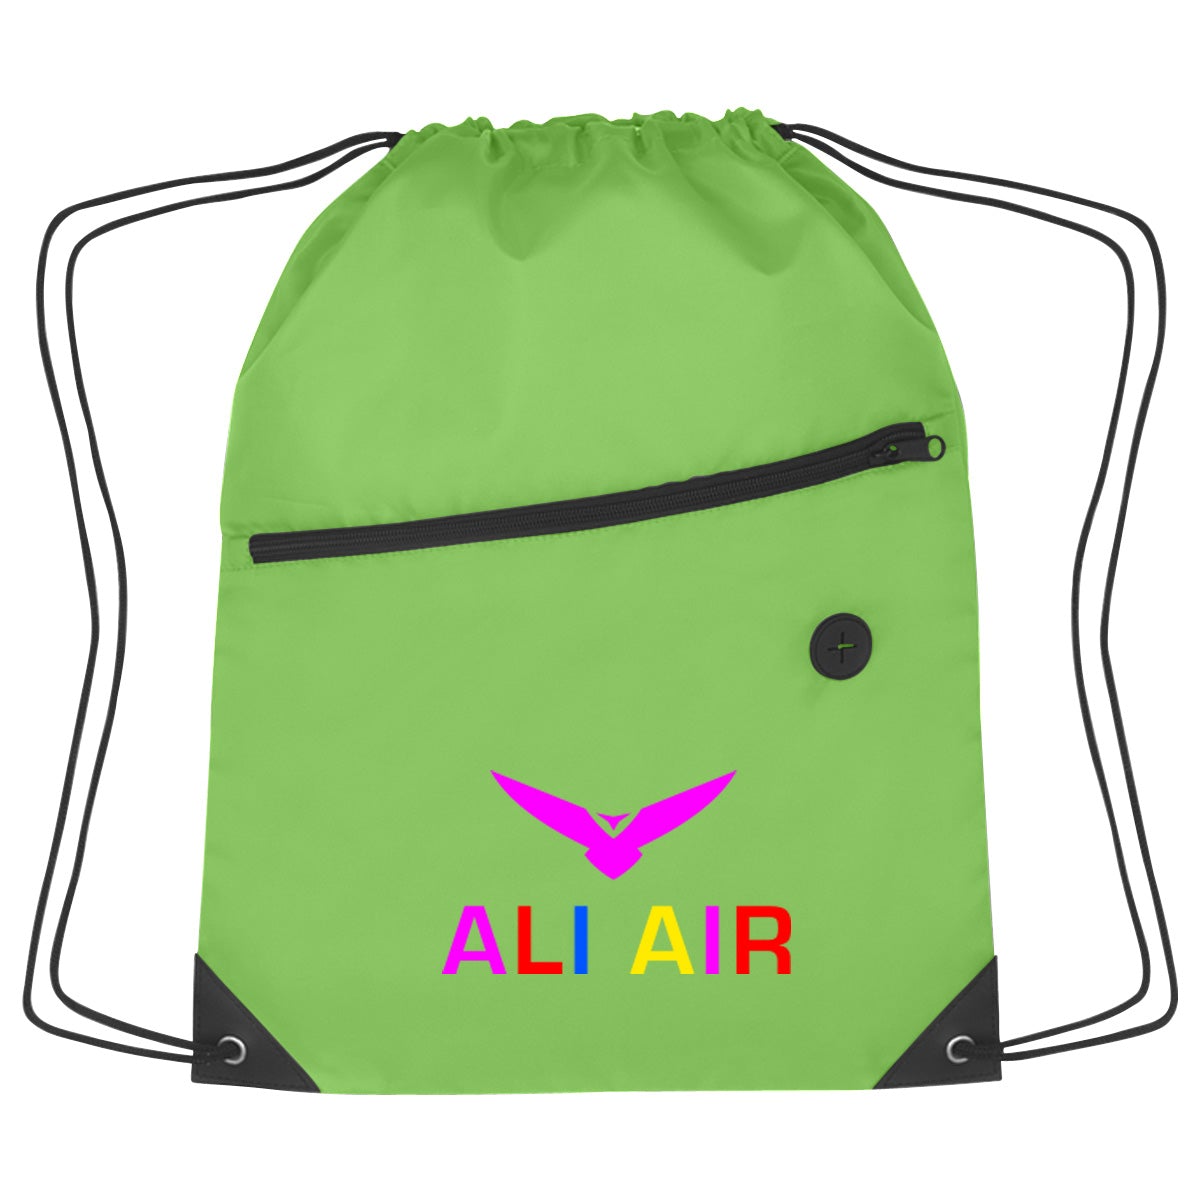 Hit Sports Pack with Front Zipper Drawstring Bags Hit Promo Lime Green Multi Color 